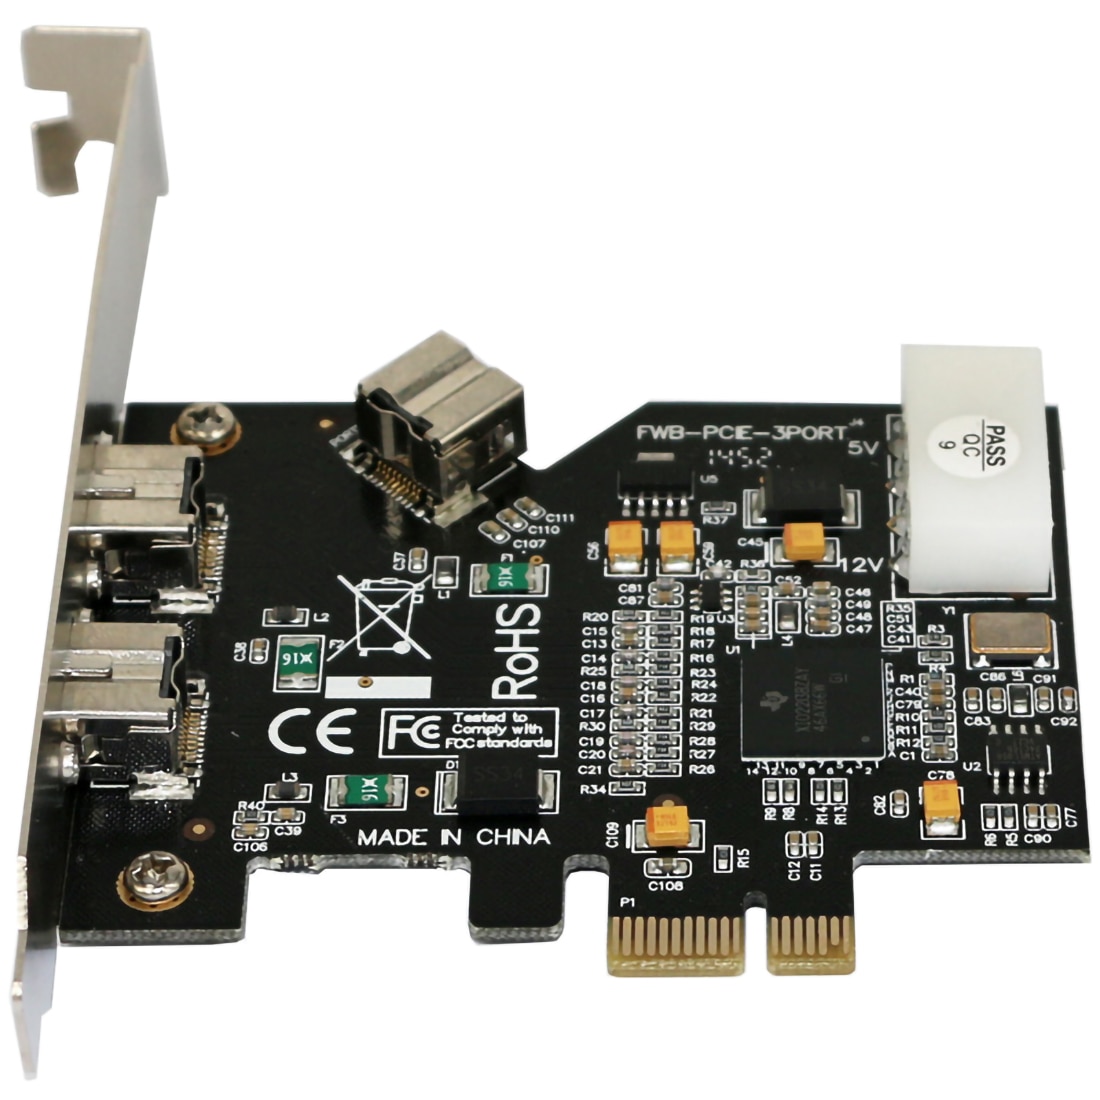 PCI Express PCI-E x1 to 3 Ports 1394B Controller Card Add On Card for FireWire 800 IEEE 1394 B 2+1 Digital Camera Video Capture